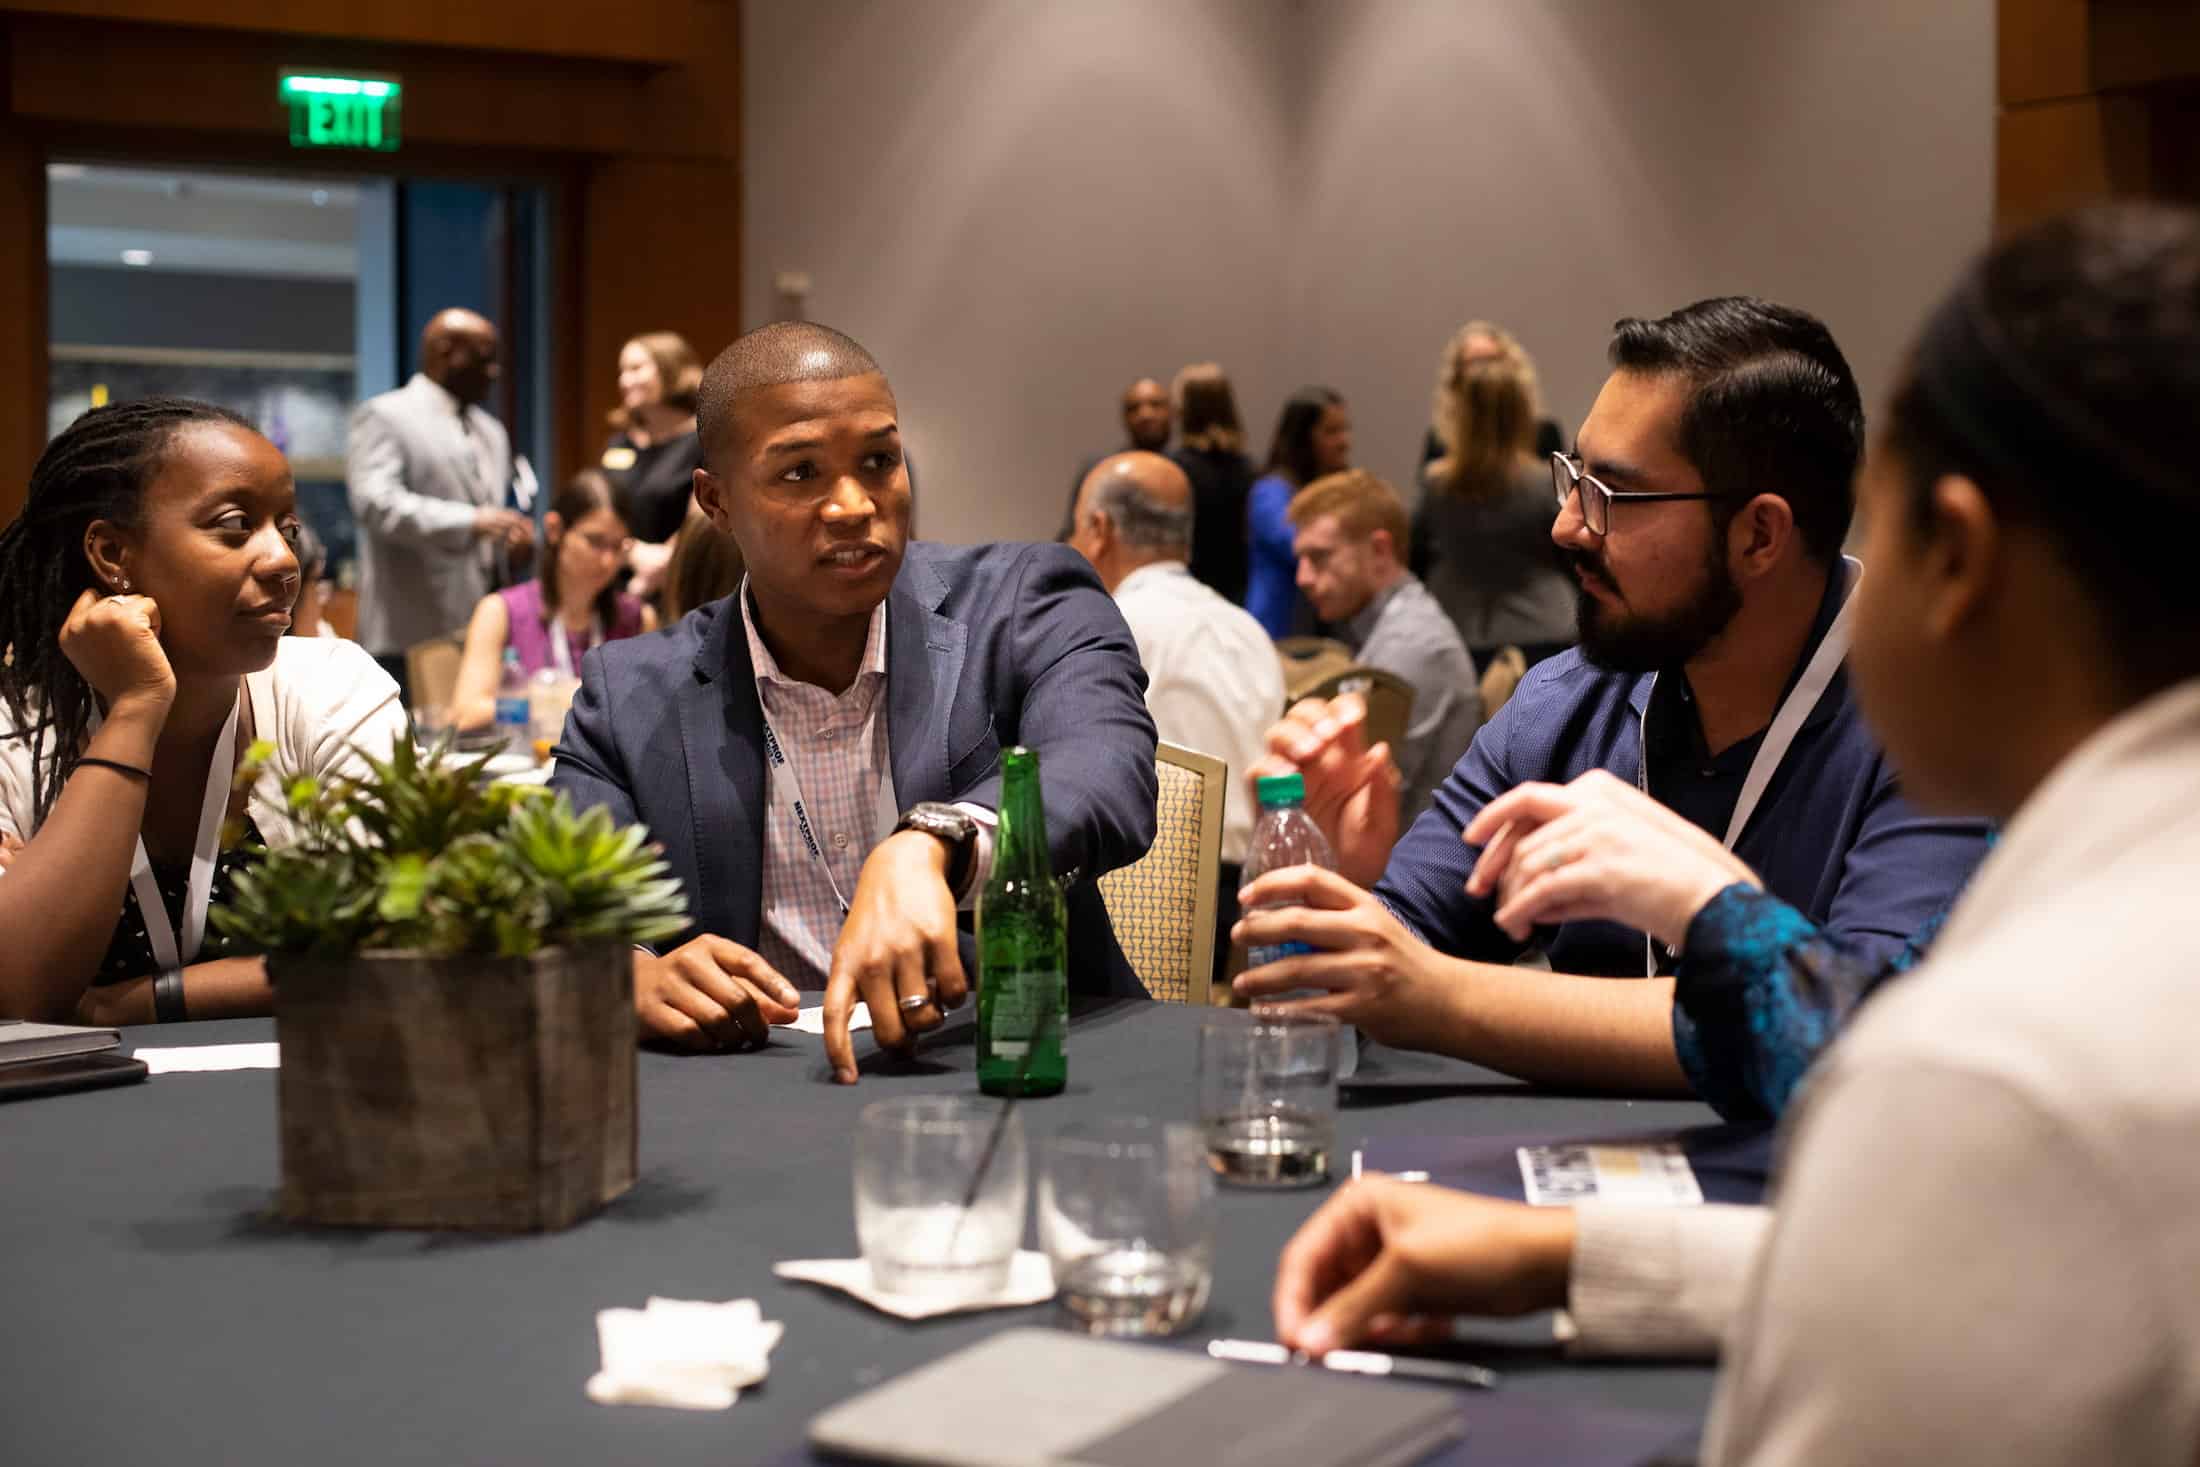 Black man points toward tabletop while talking to other men at a table